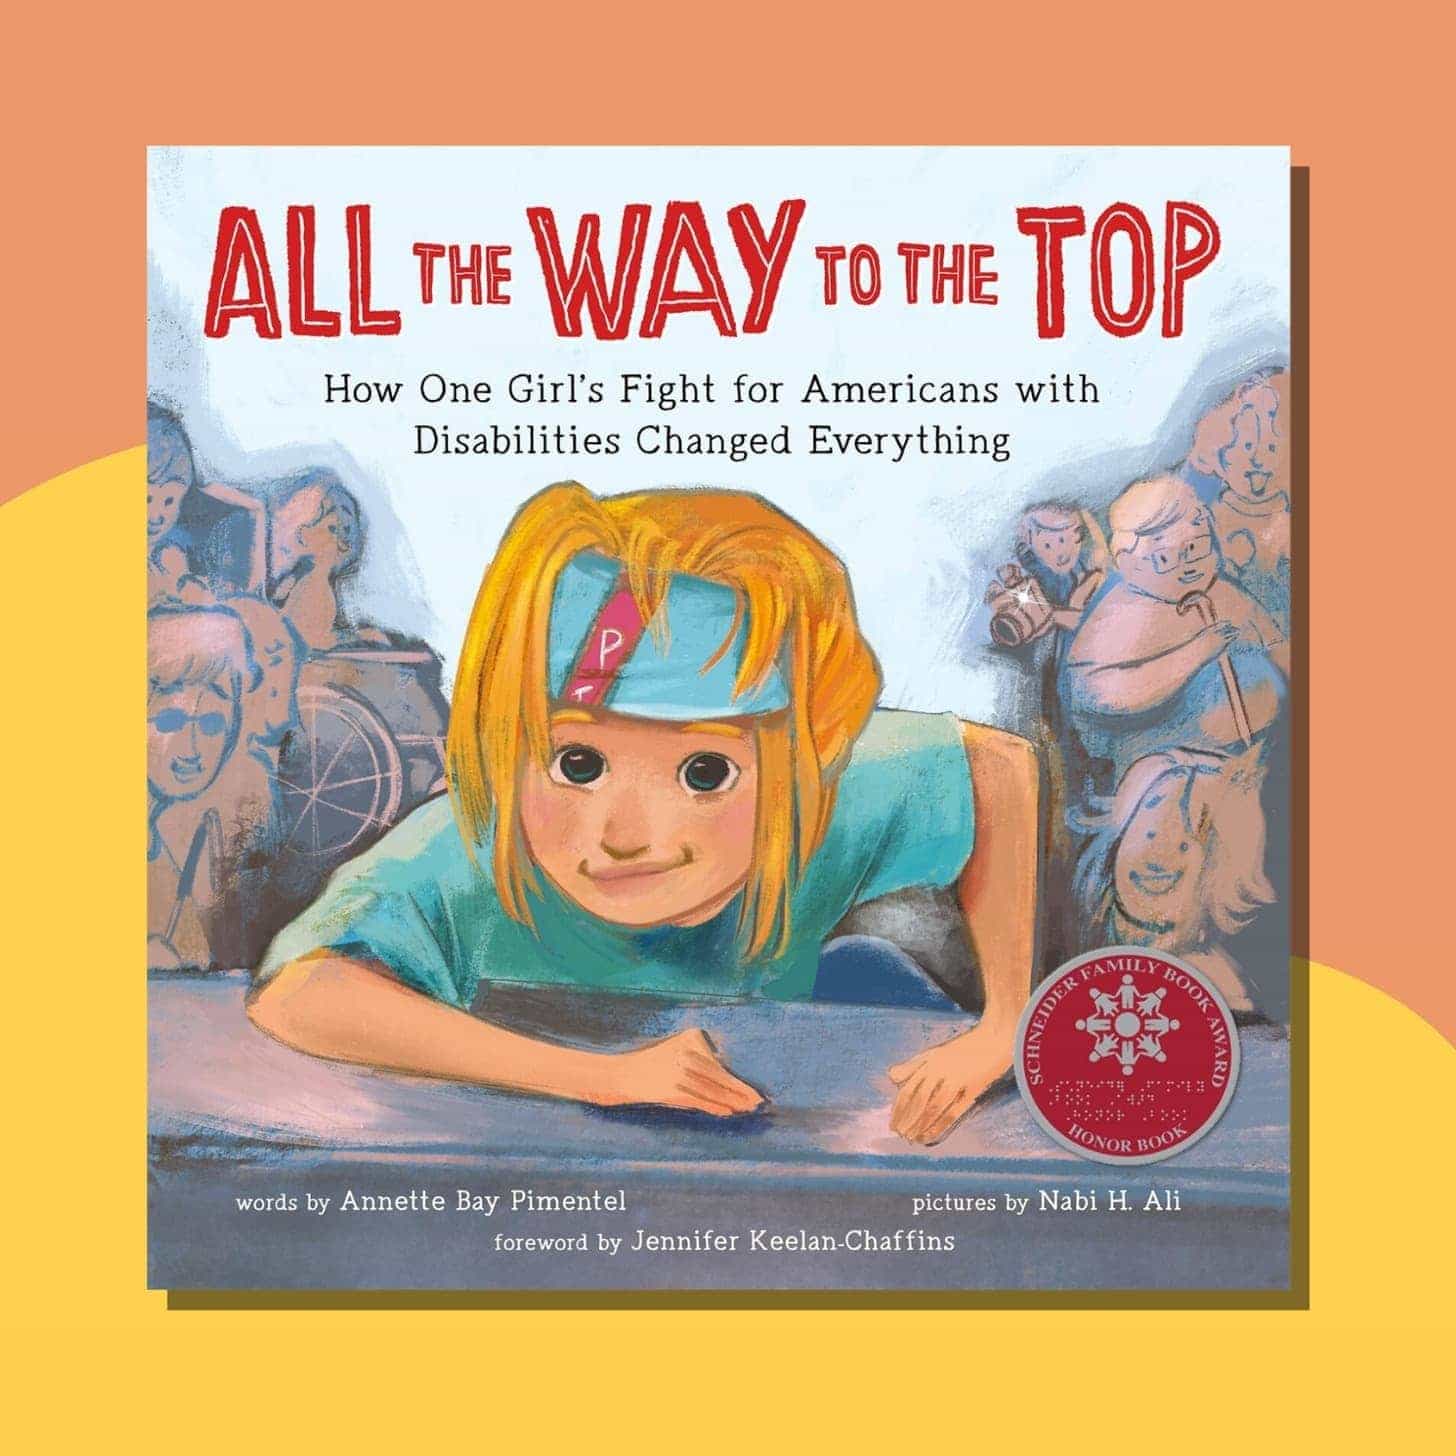 “All the Way to the Top: How One Girl’s Fight for Americans with Disabilities Changed Everything” by Annette Bay Pimente and illustrated by Nabi Ali - square children's book with a cover with a child with orange hair climbing up stairs, while people watch in the background